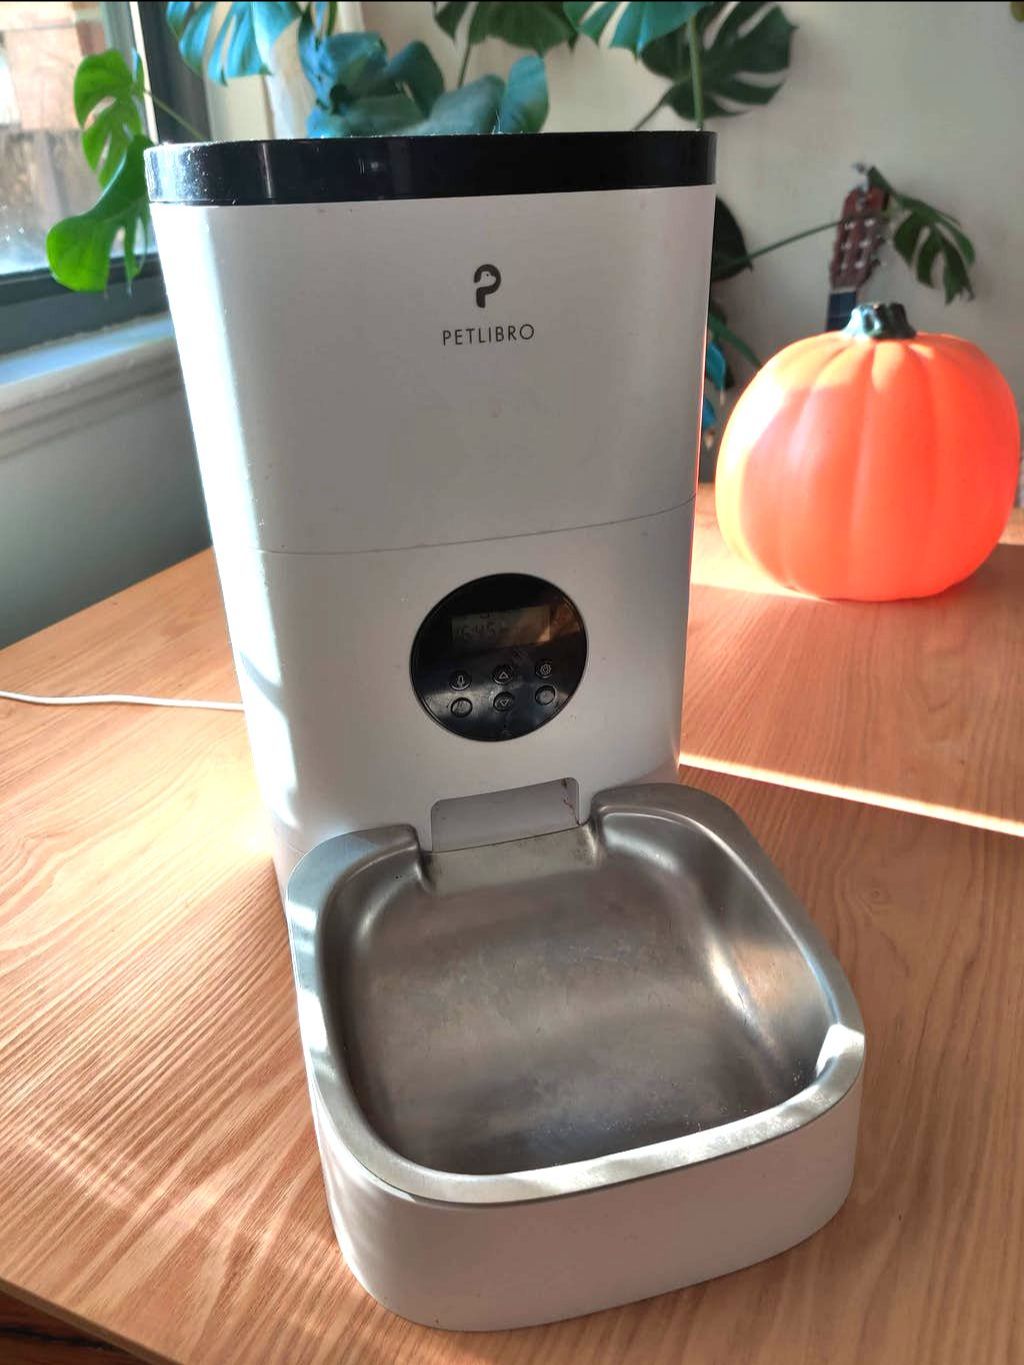 Pet feeder sits on a table with an orange pumpkin in the background. The pet feeder is white with a small black display, a black lid, and a silver tray.